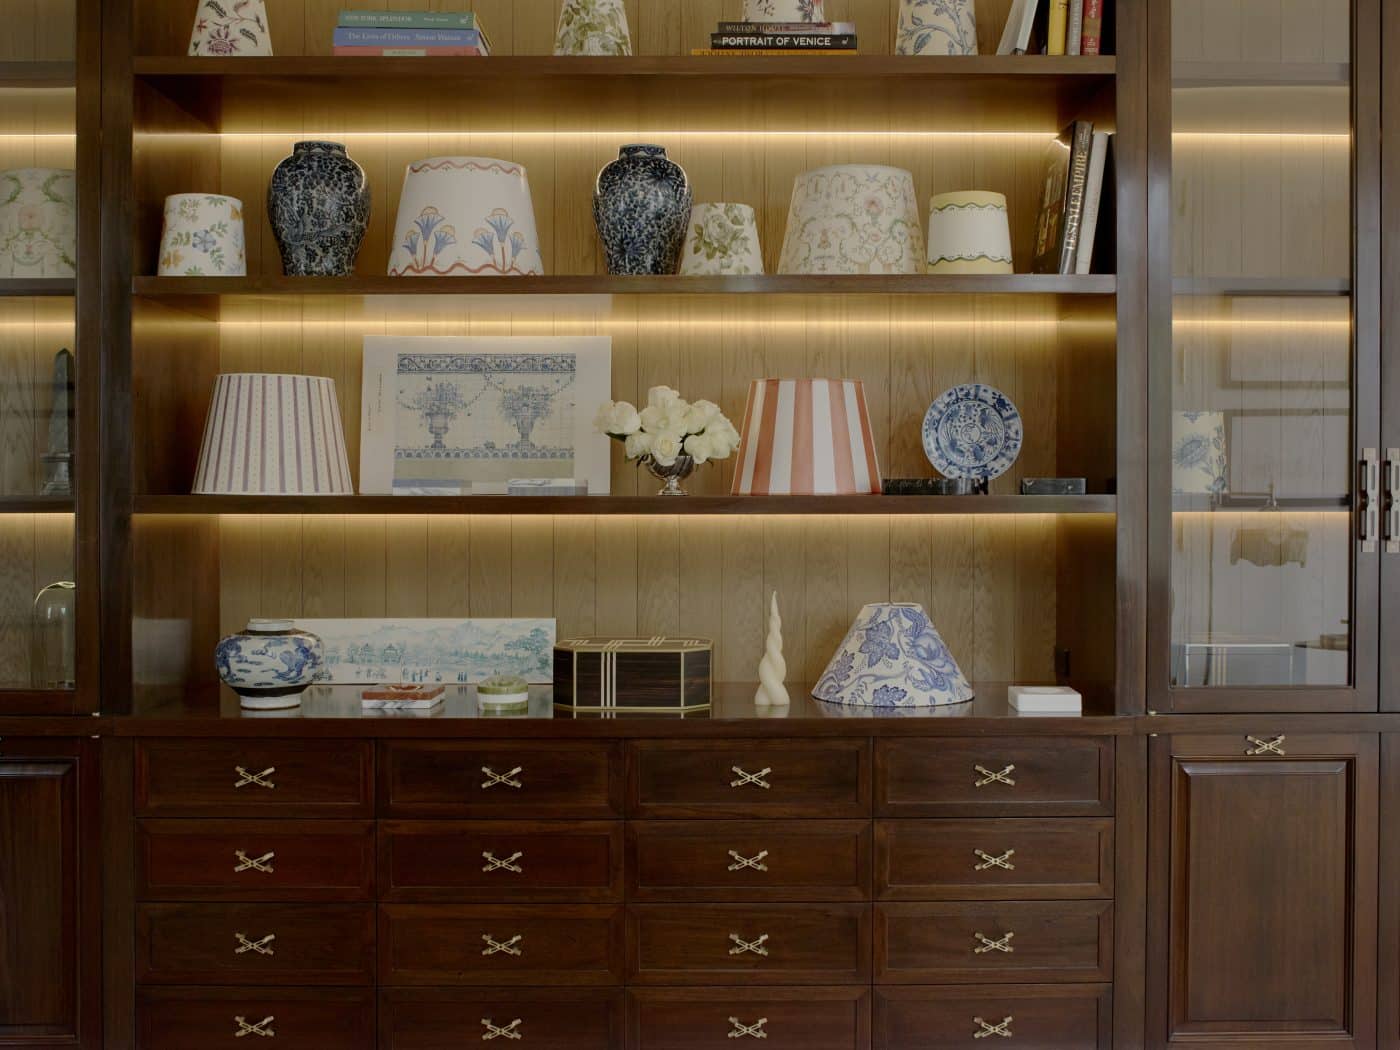 A wall unit in the Loyzaga showroom with shelves displaying books, hand-painted lampshades, marble ashtrays  and other decorative objects